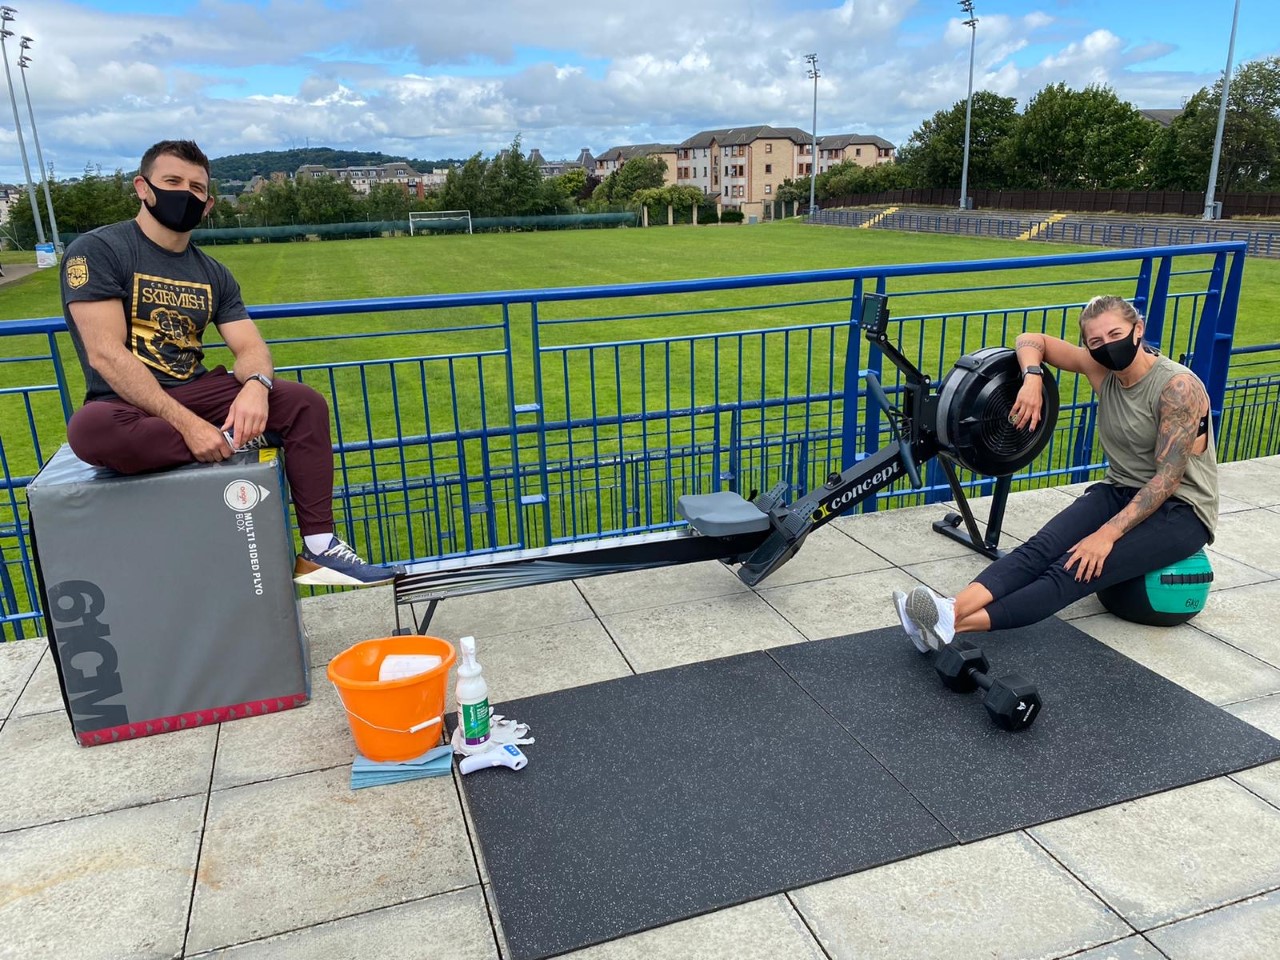 NEW – 121s and FAMILY CrossFit Coaching on Outdoor Private Terrace